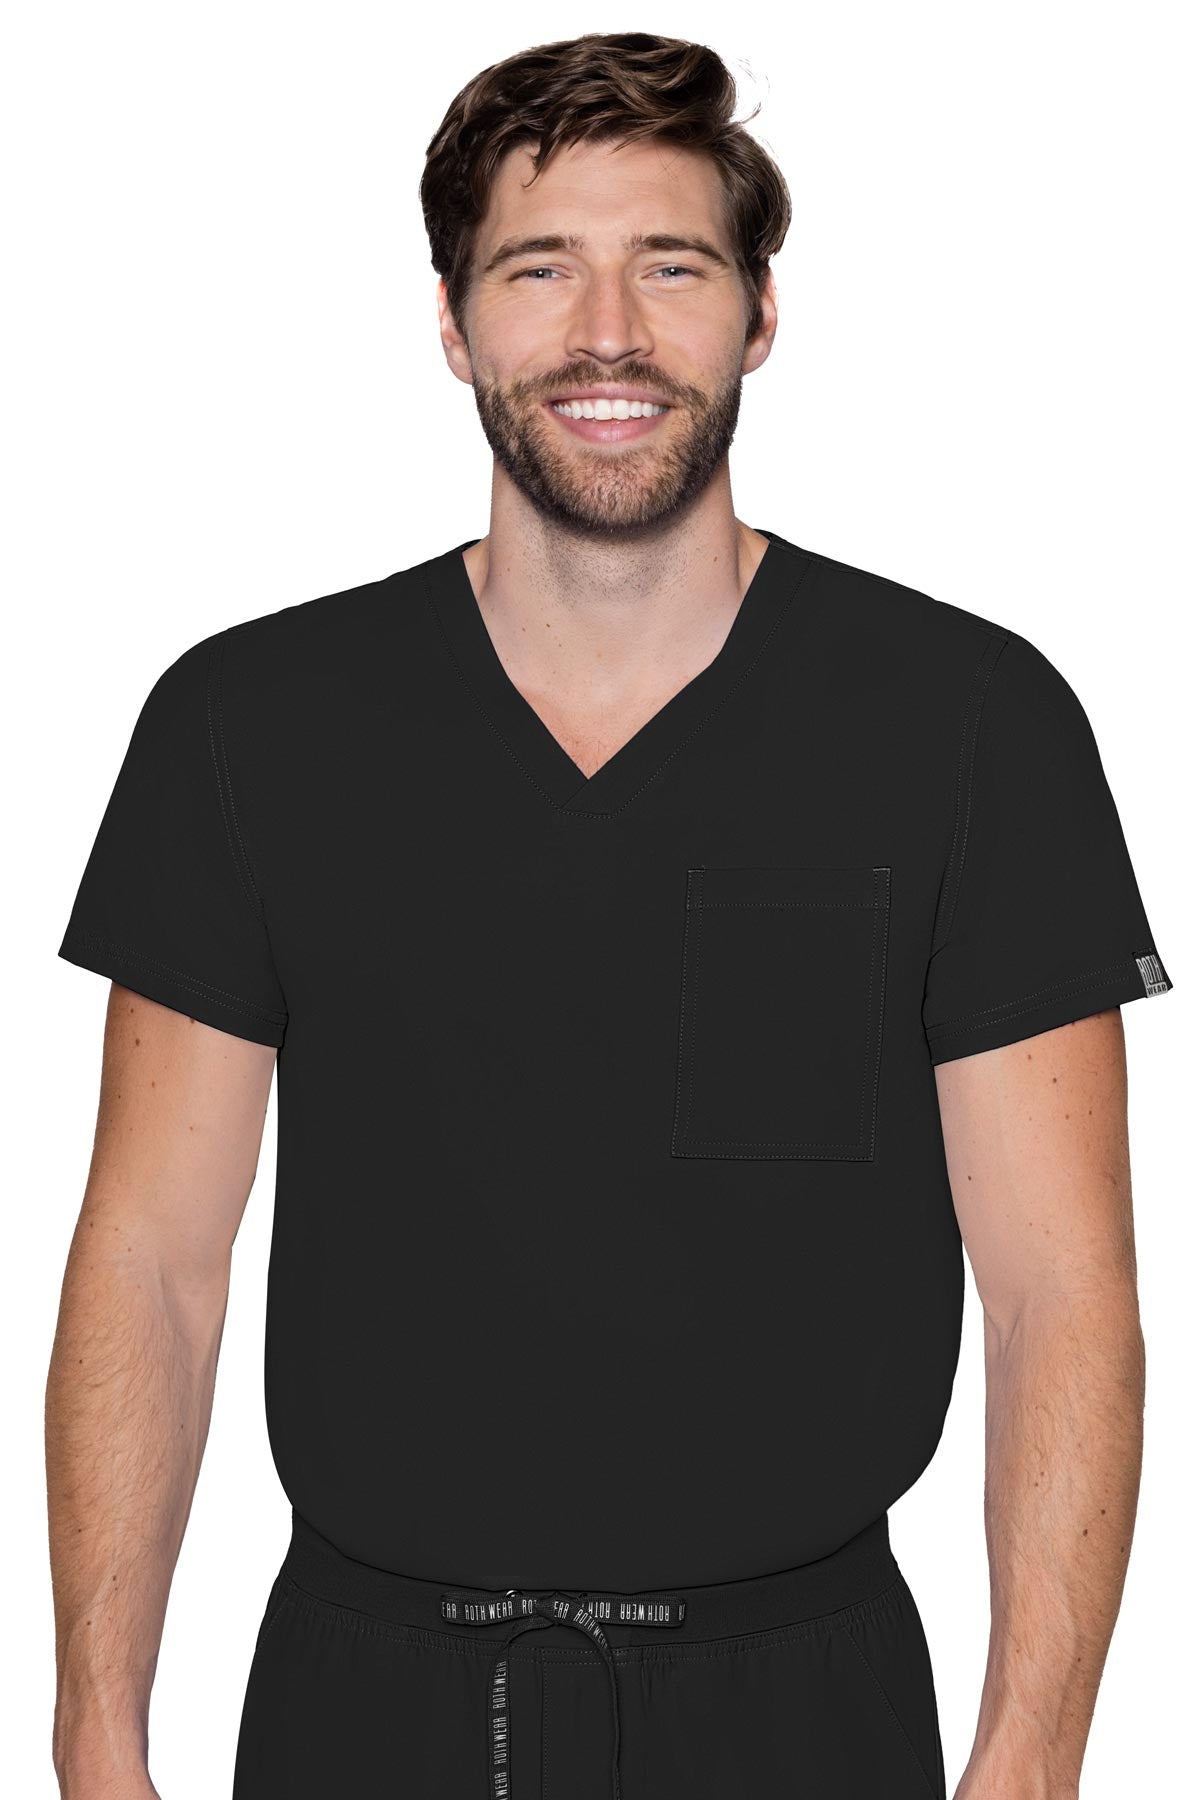 Med Couture Roth Wear Insight 2478 Men's Top Black